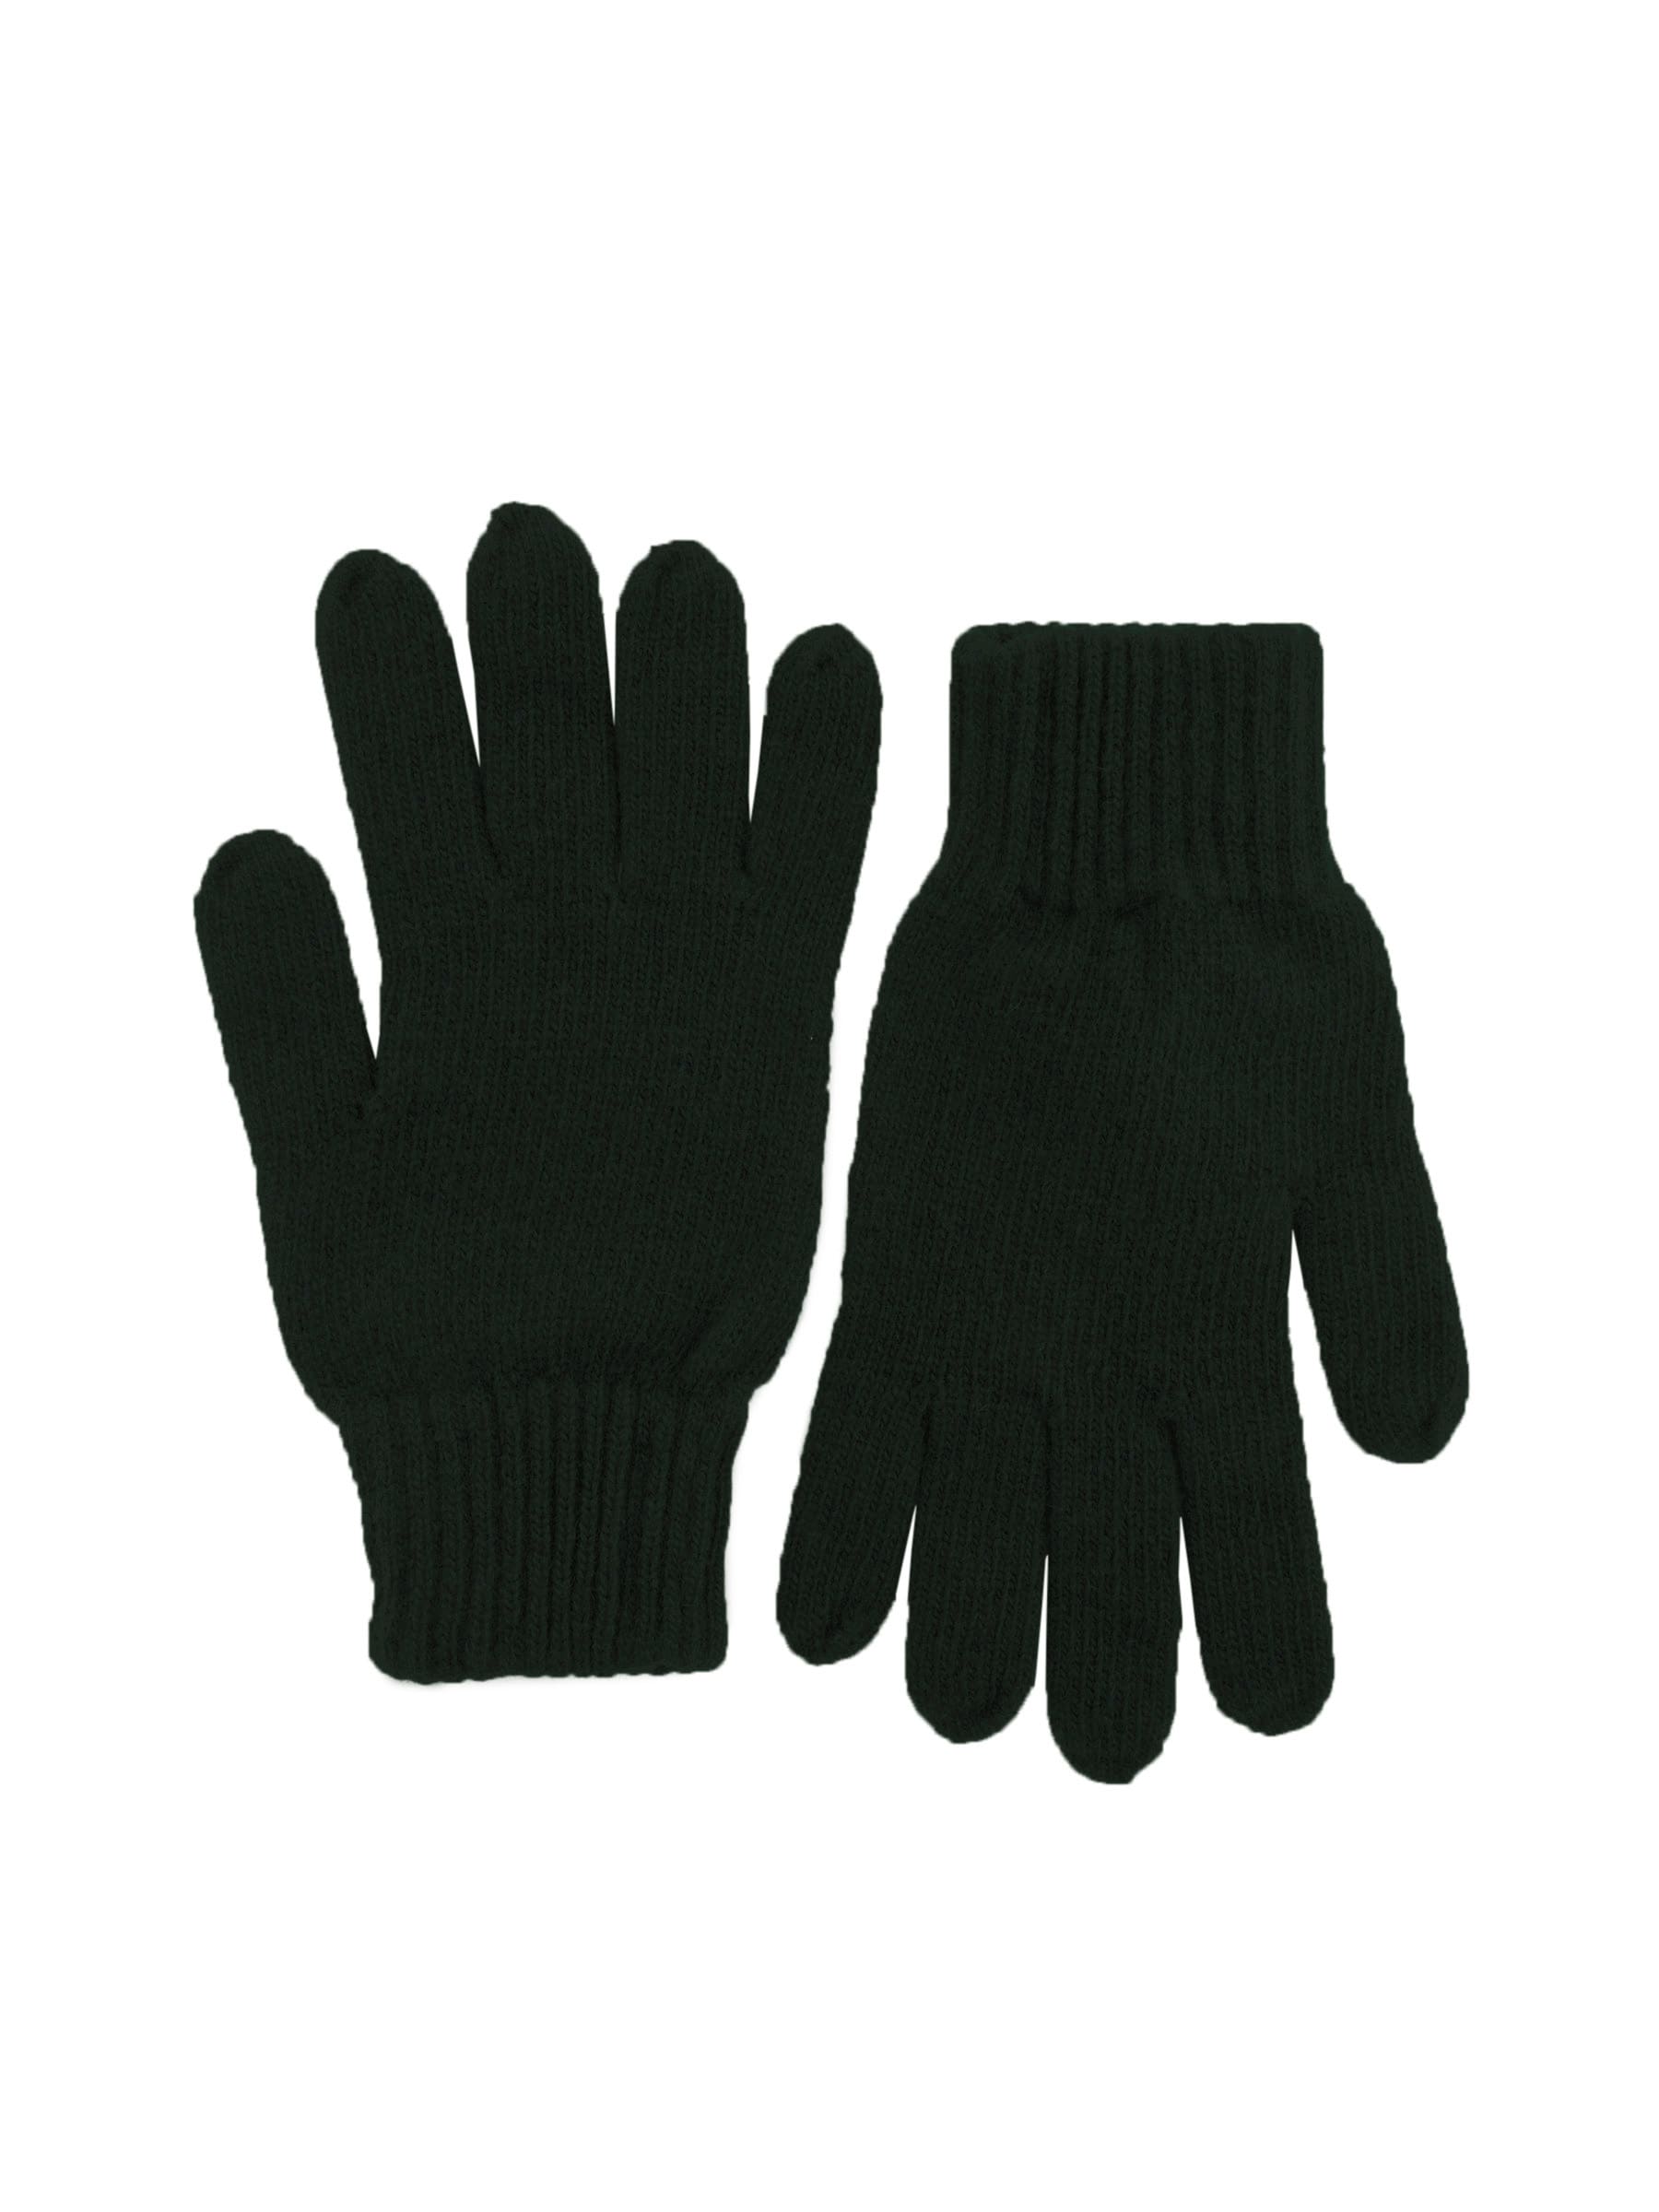 United Colors of Benetton Men Solid Green Gloves